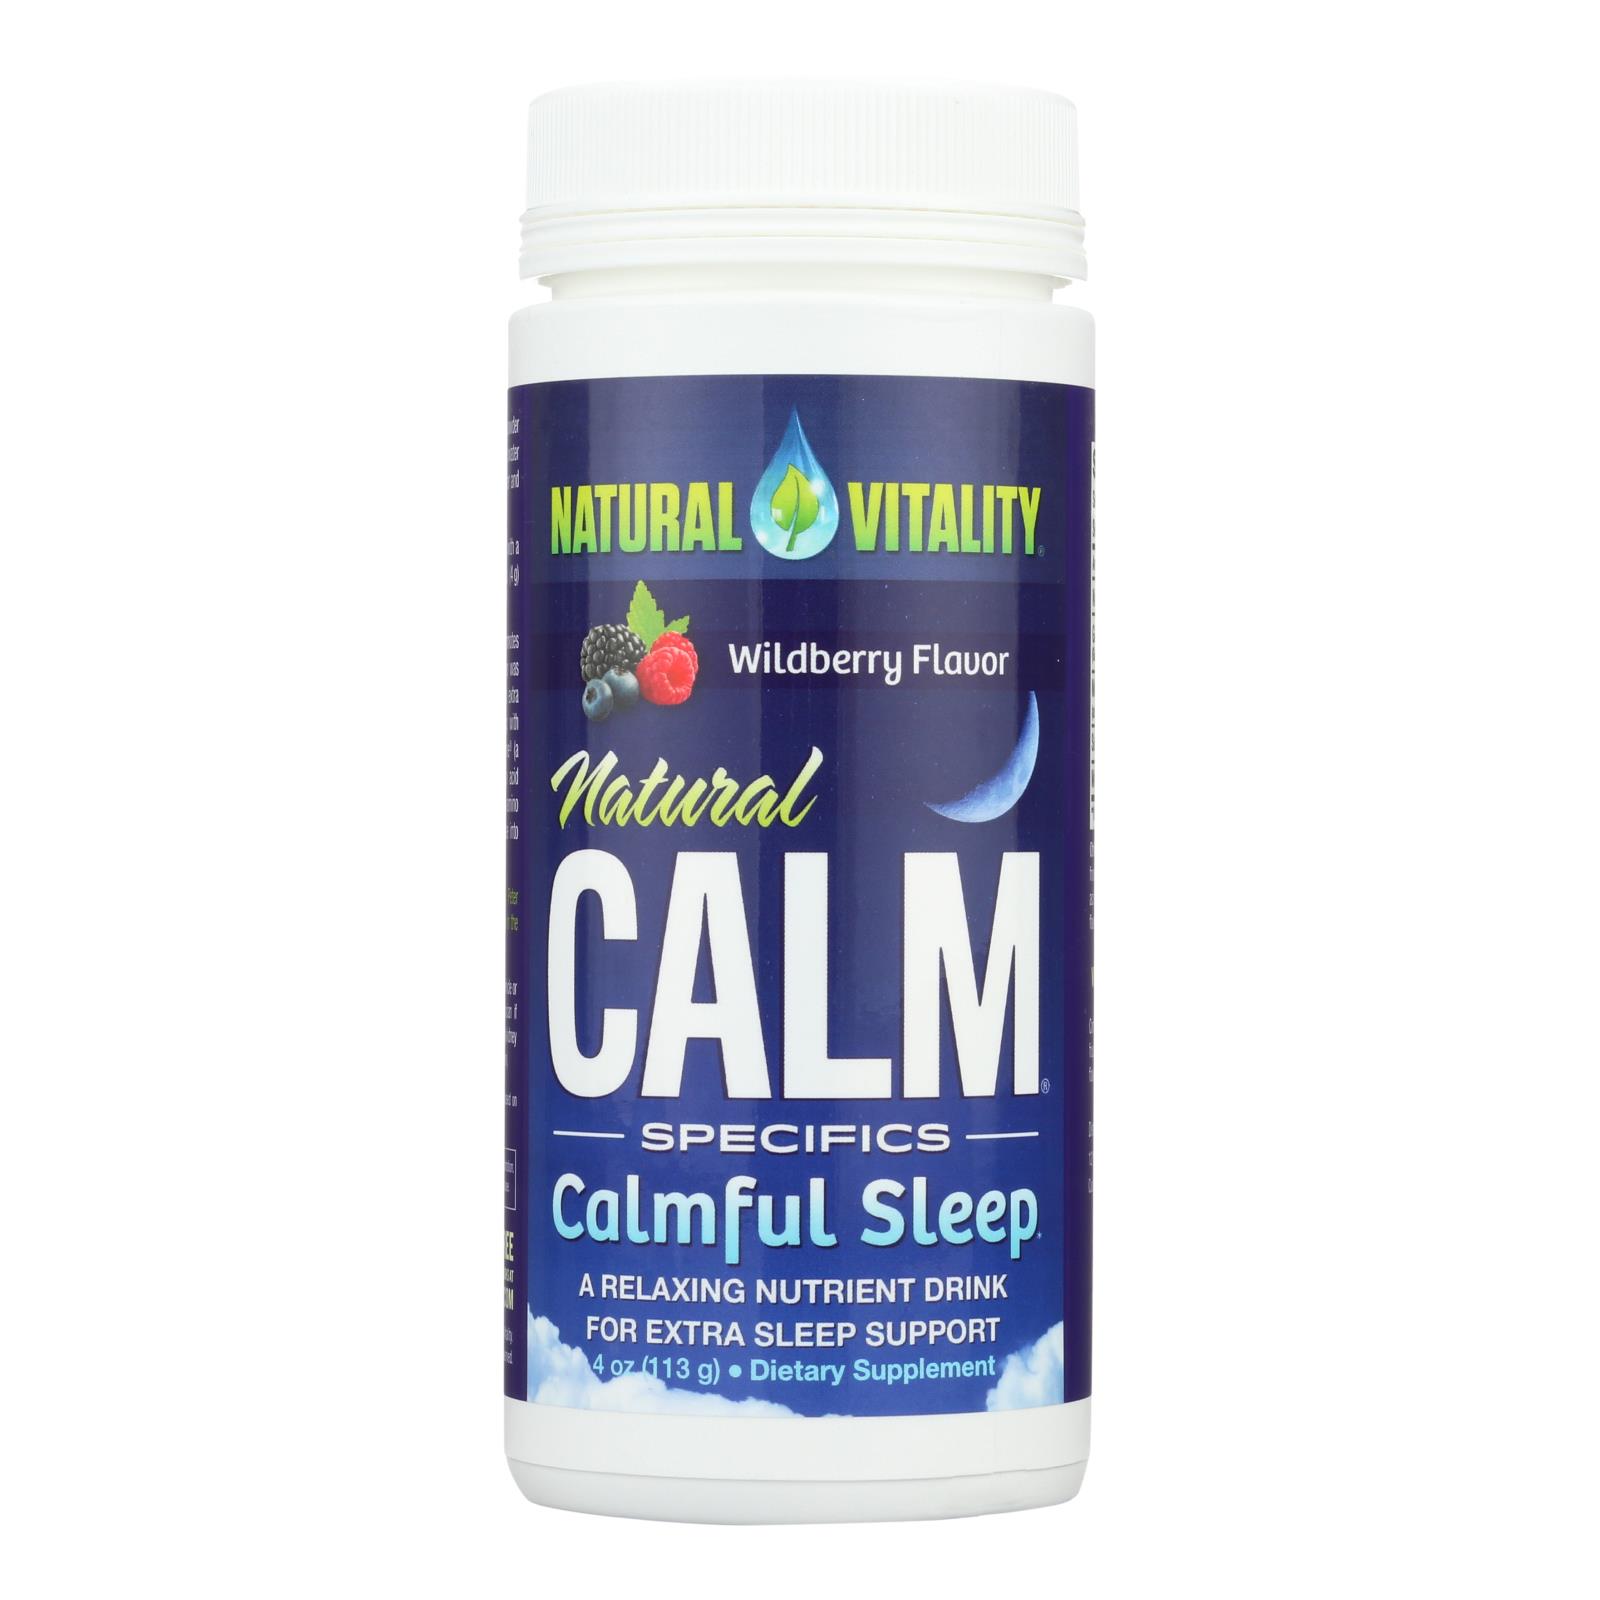 Natural Vitality's Natural Calm Specifics Calm Sleep With Natural Wildberry Flavor - 1 Each - 6 OZ